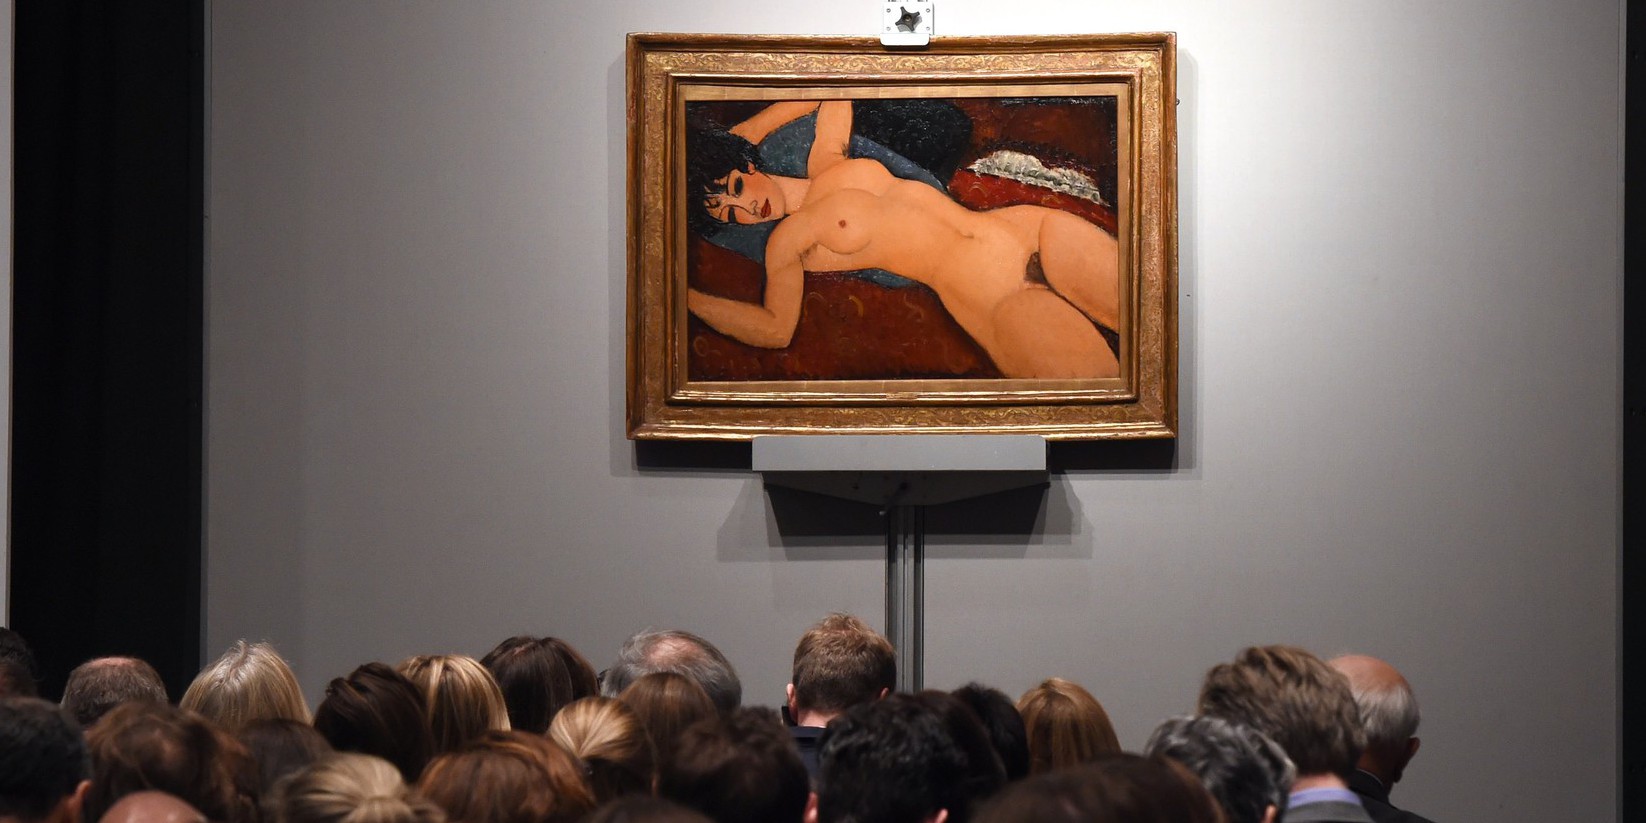 Crowds sit in front of Amedeo Modigliani's 